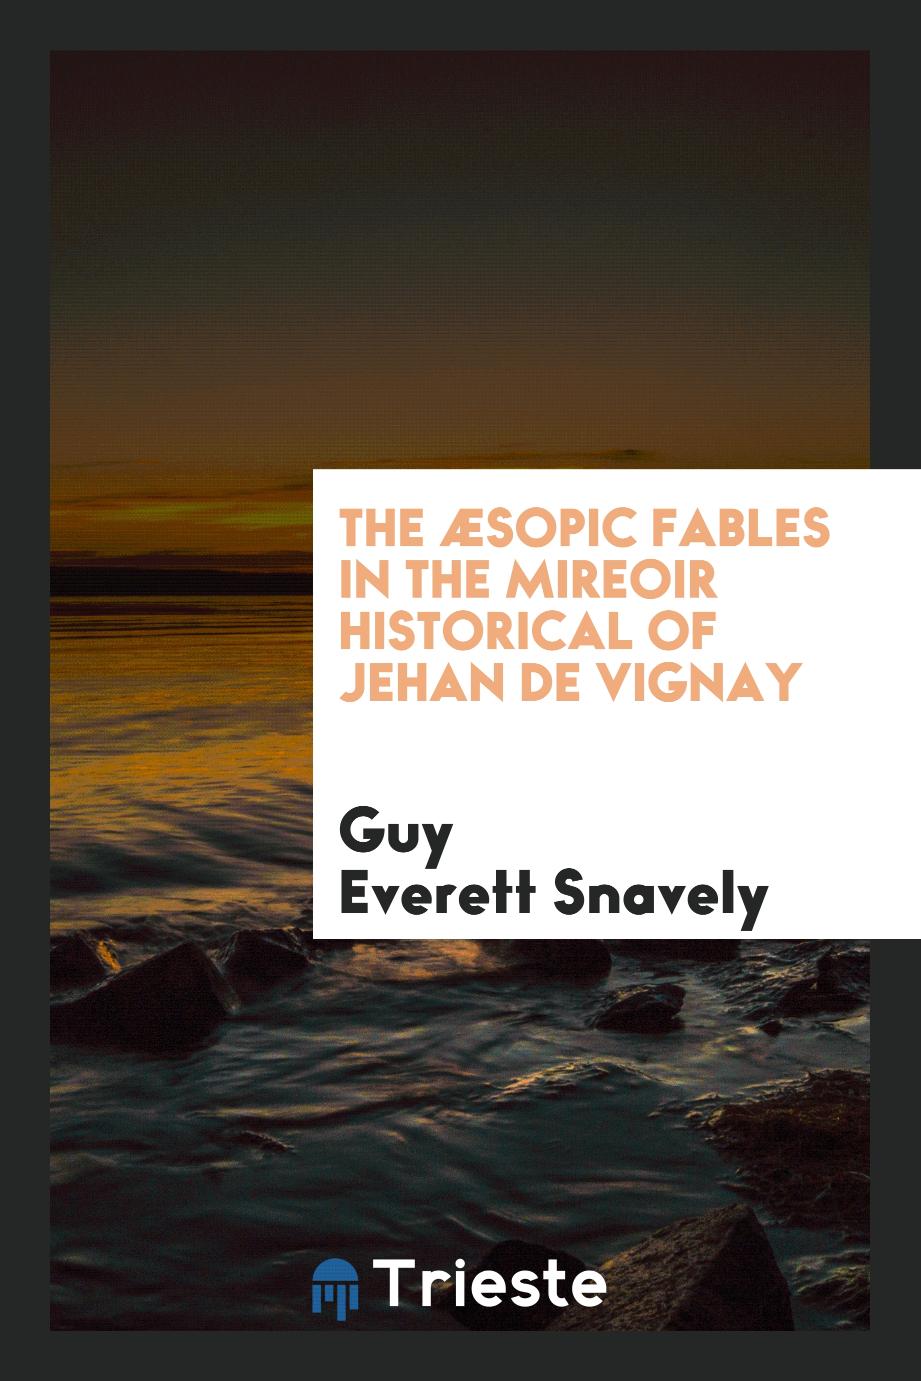 The Æsopic fables in the Mireoir historical of Jehan de Vignay